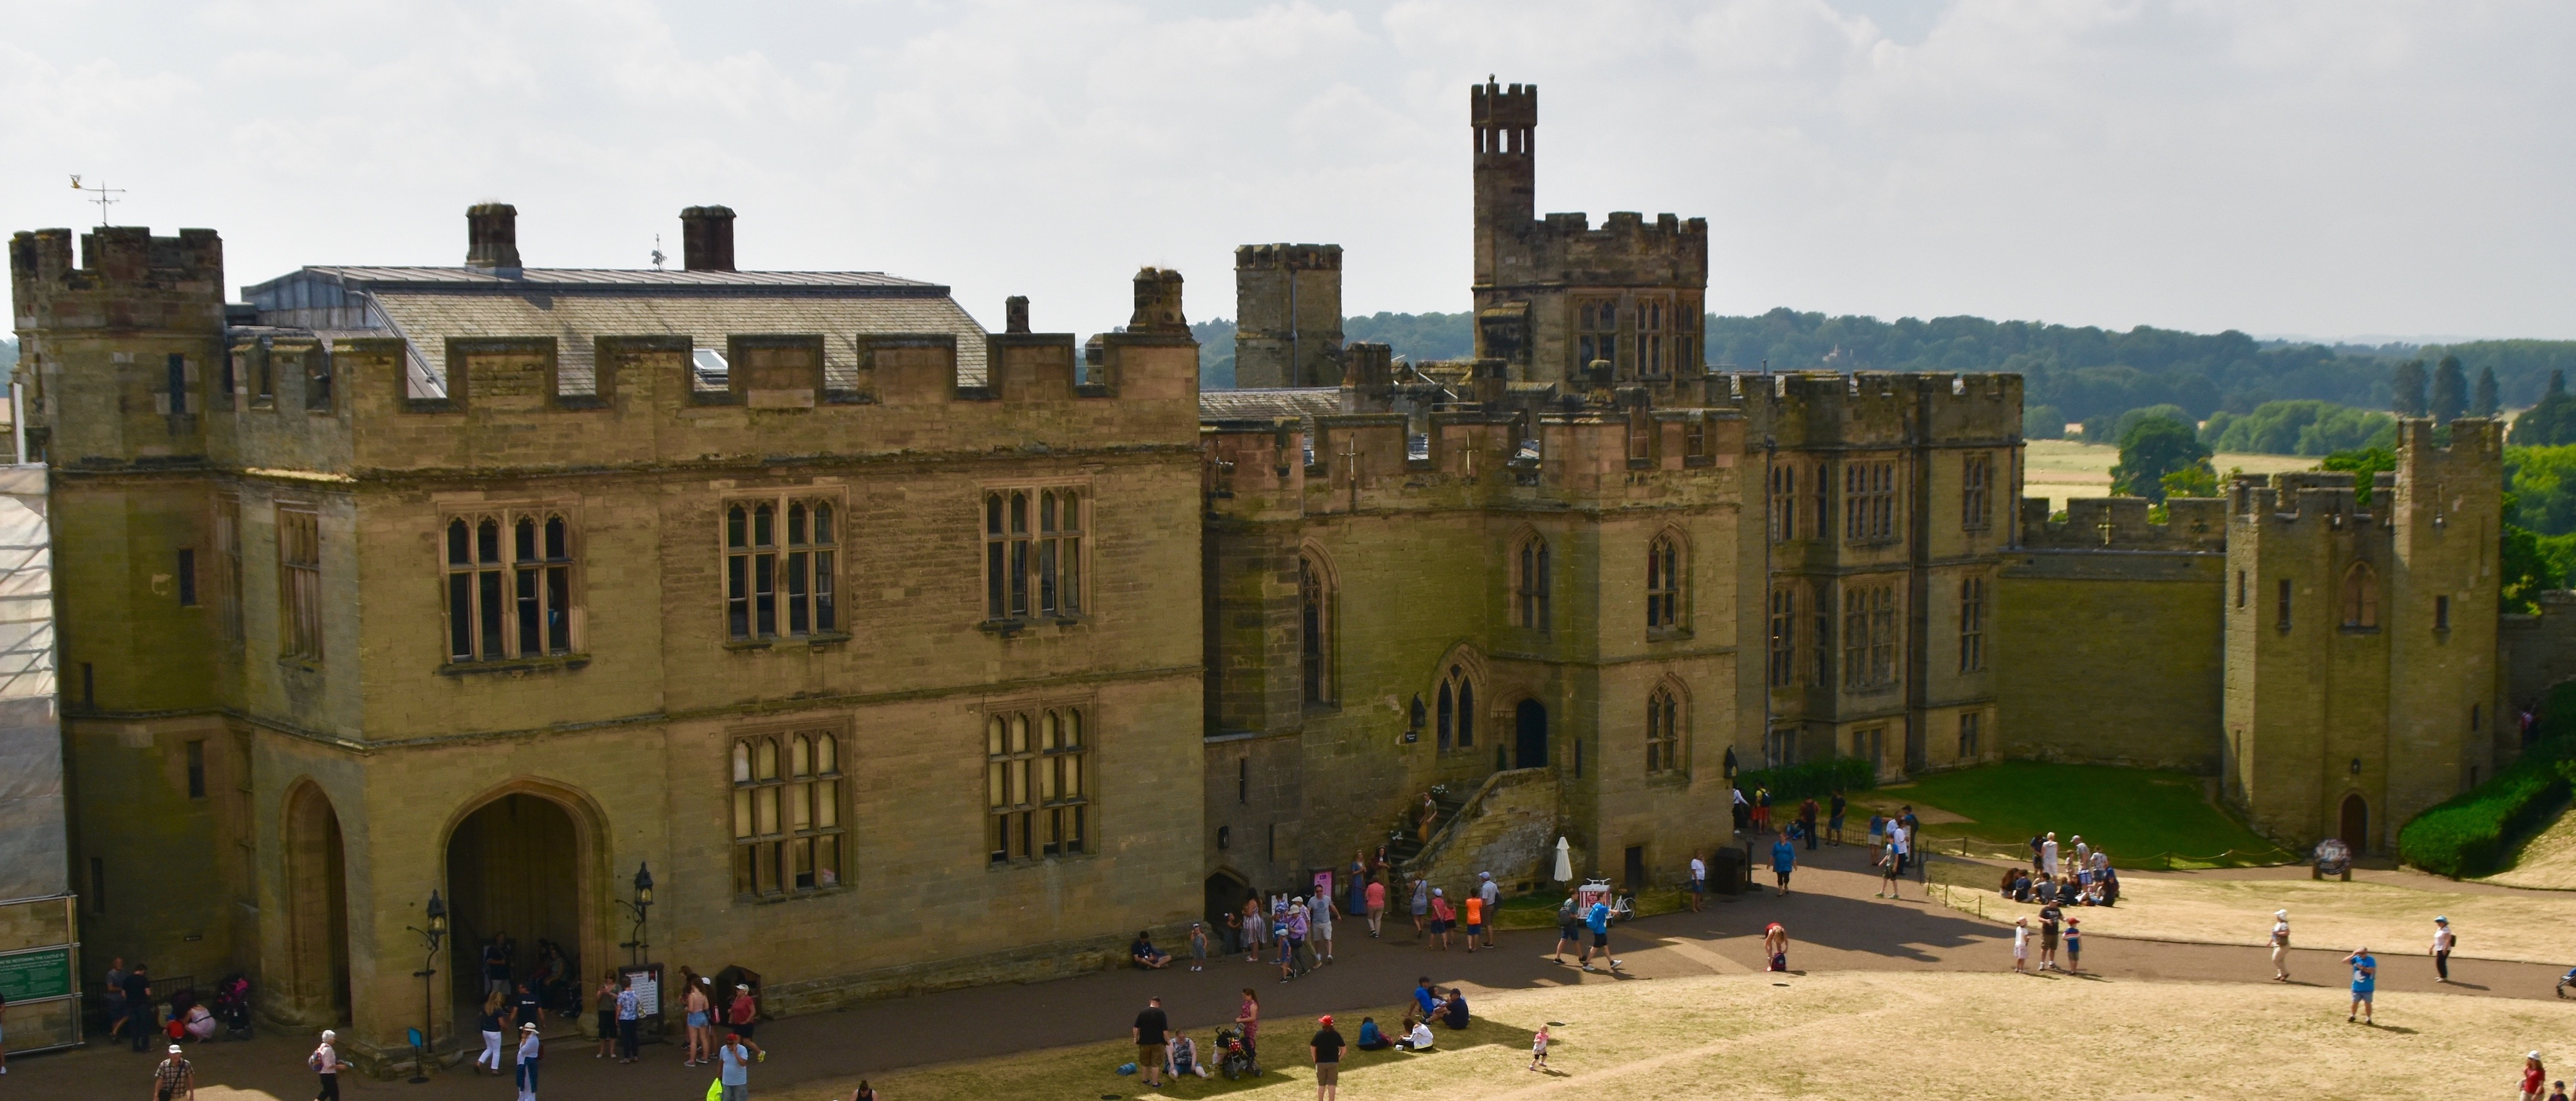 View from the Ramparts, Warwick Castle